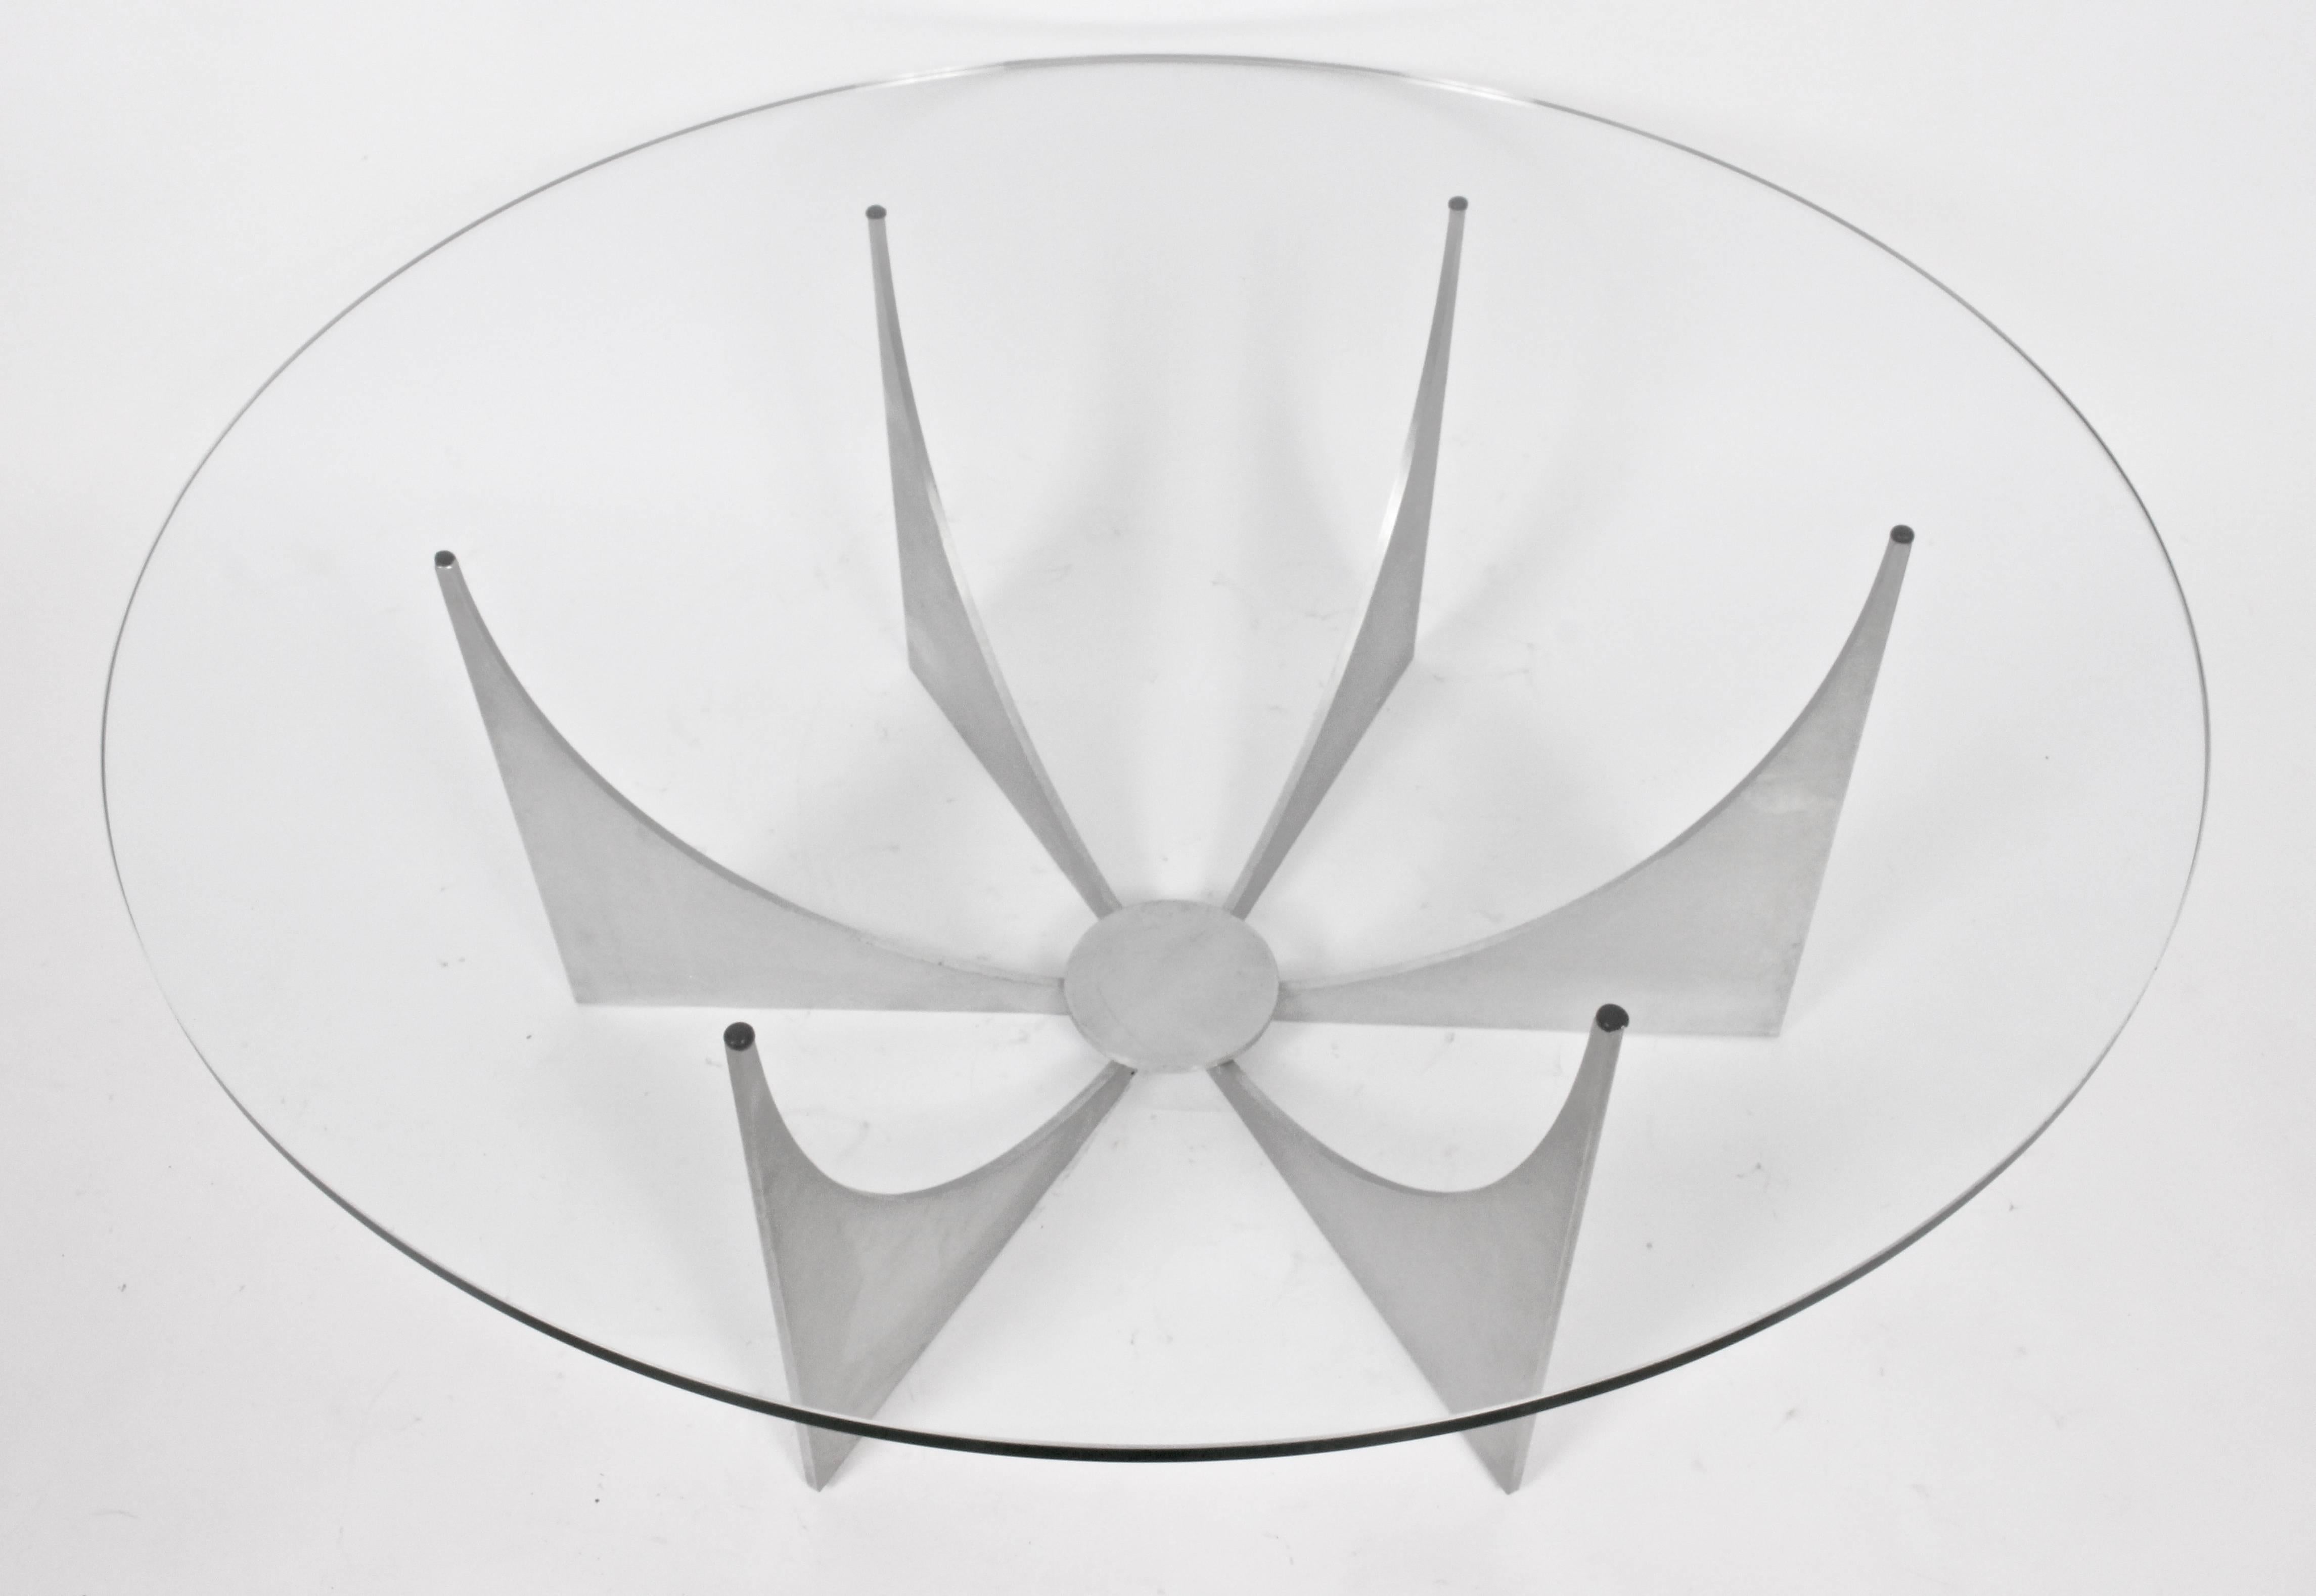 Donald Drumm Minimalist round cast aluminum & glass cocktail table, circa 1970. Classic. Large. Modernist. Geometric. 2 pieces. Base 15H x 30.5W. Glass measures .5D x 42W.  Kindly note that the Base can ship Parcel Service without the Glass Top.